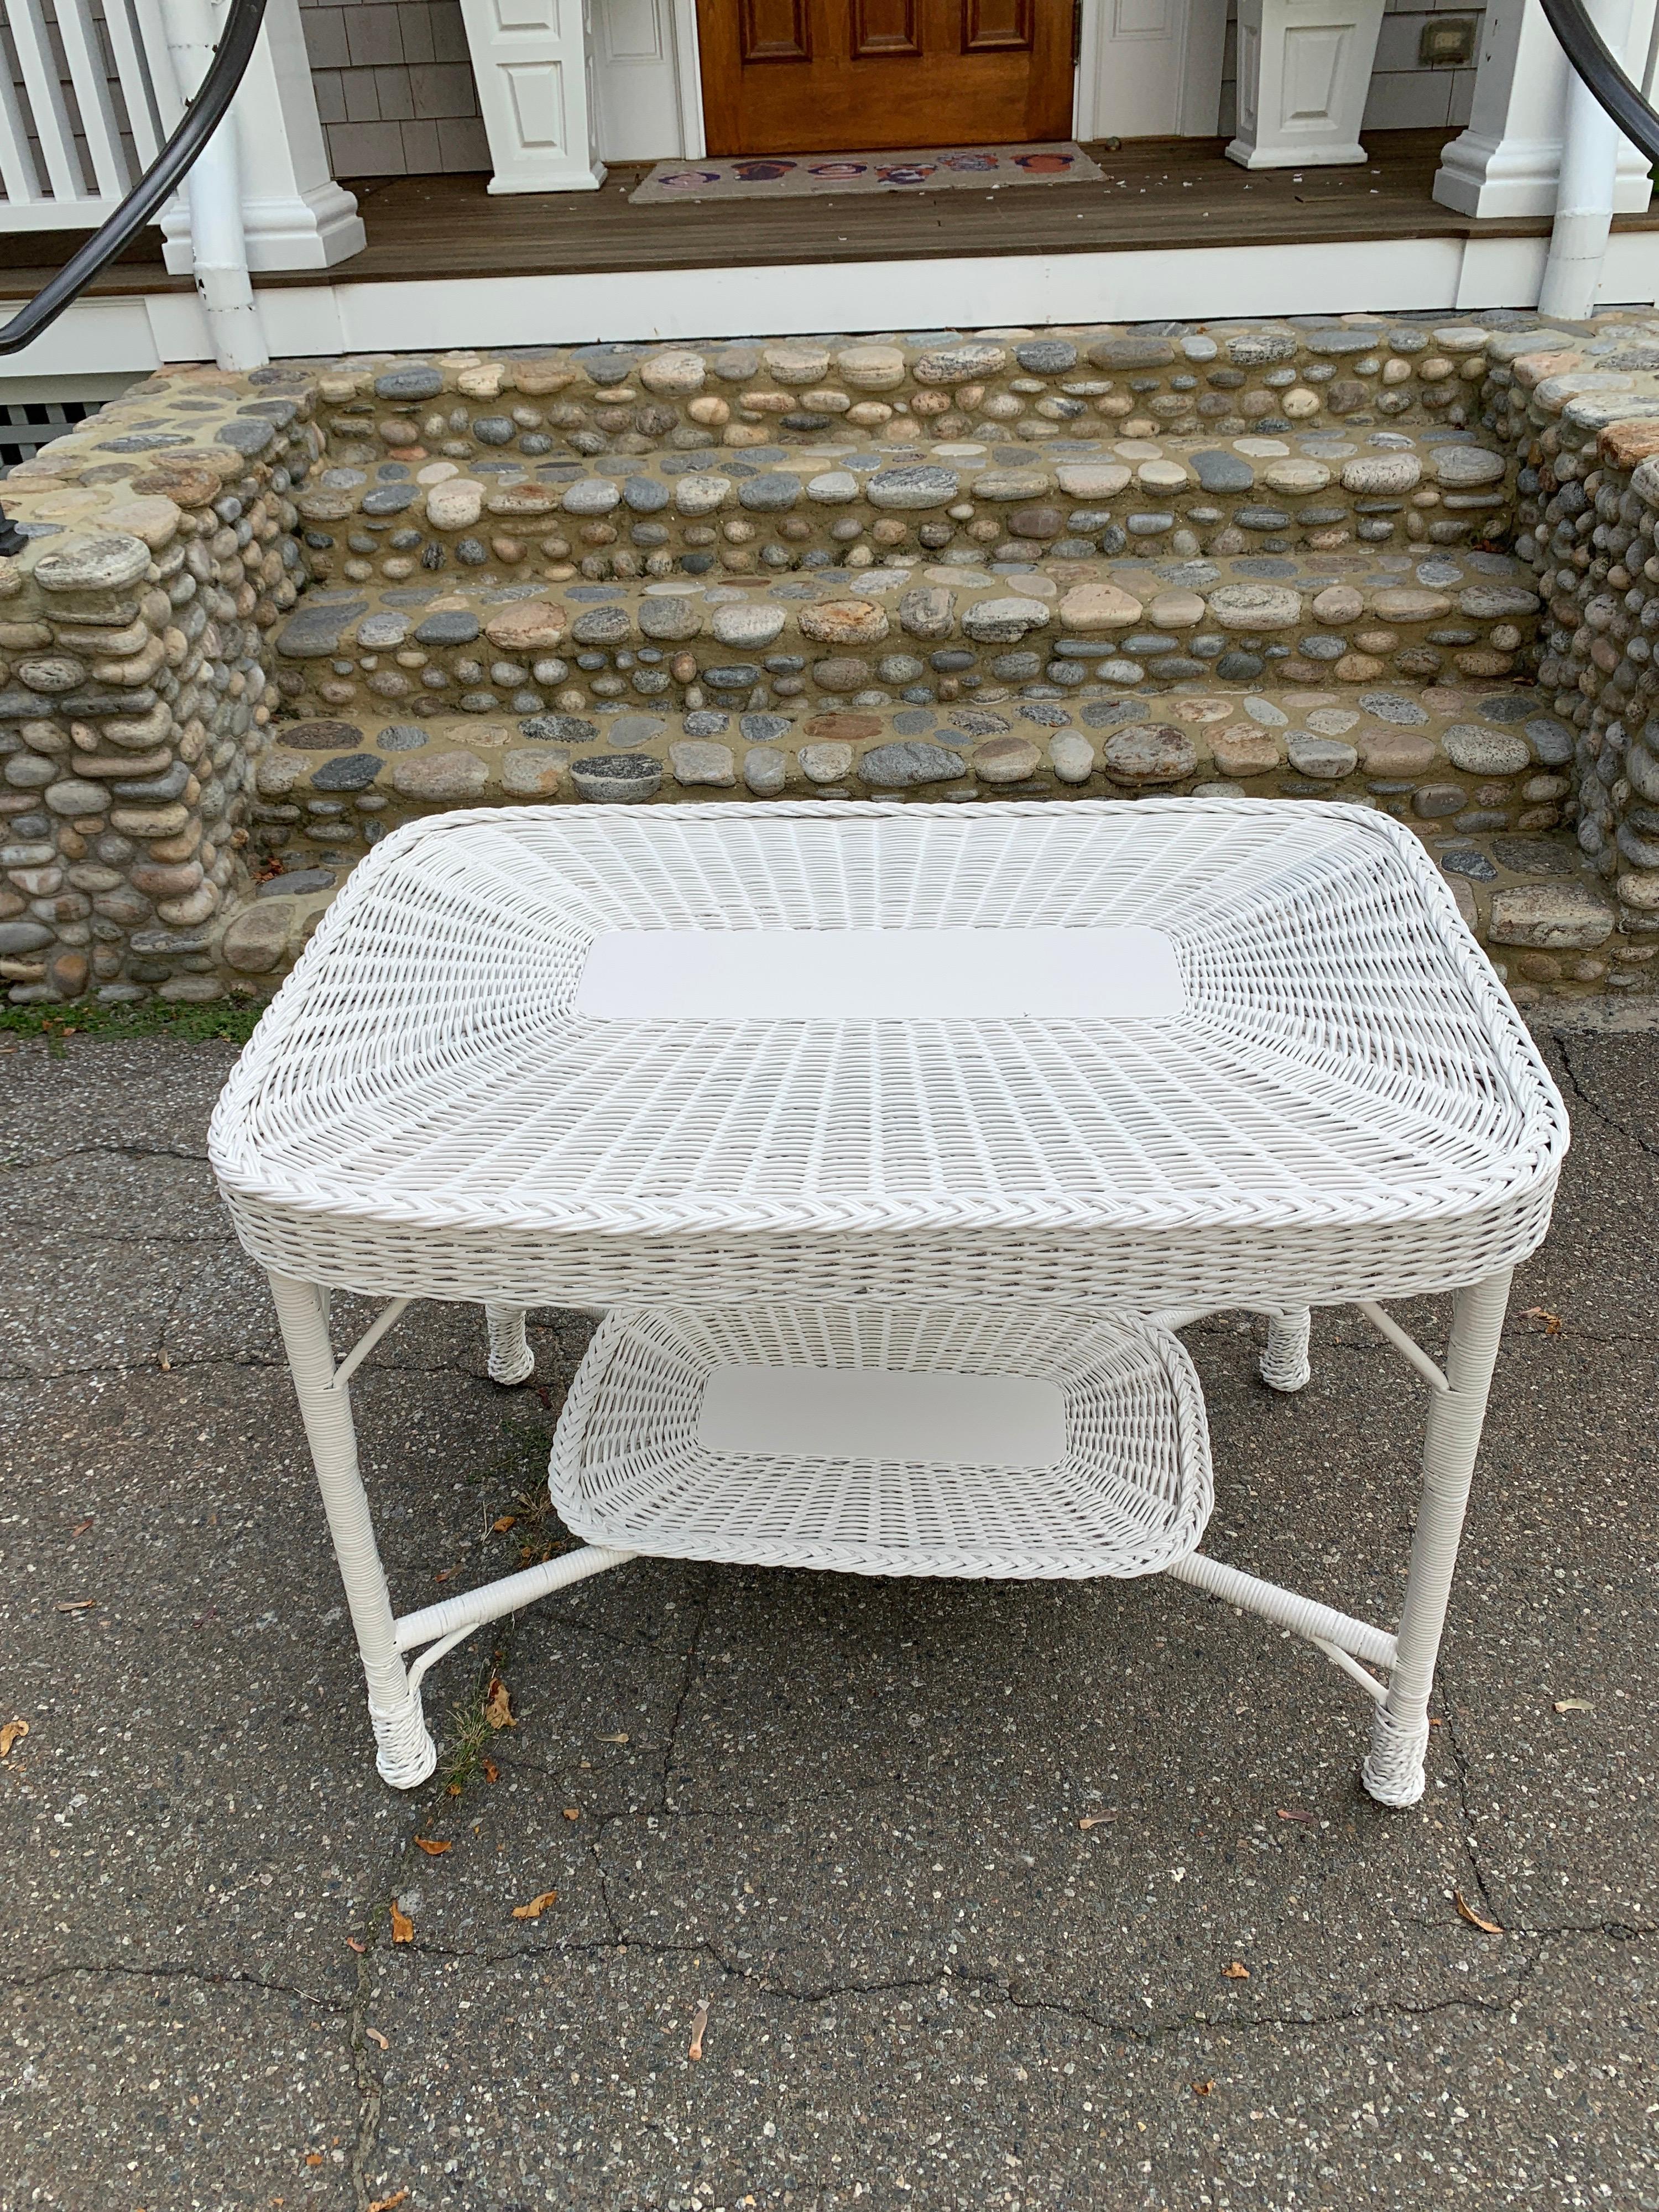 An antique white wicker table woven of reed with full woven apron and lower shelf. This is a substantial and sturdy piece. This piece measures 41